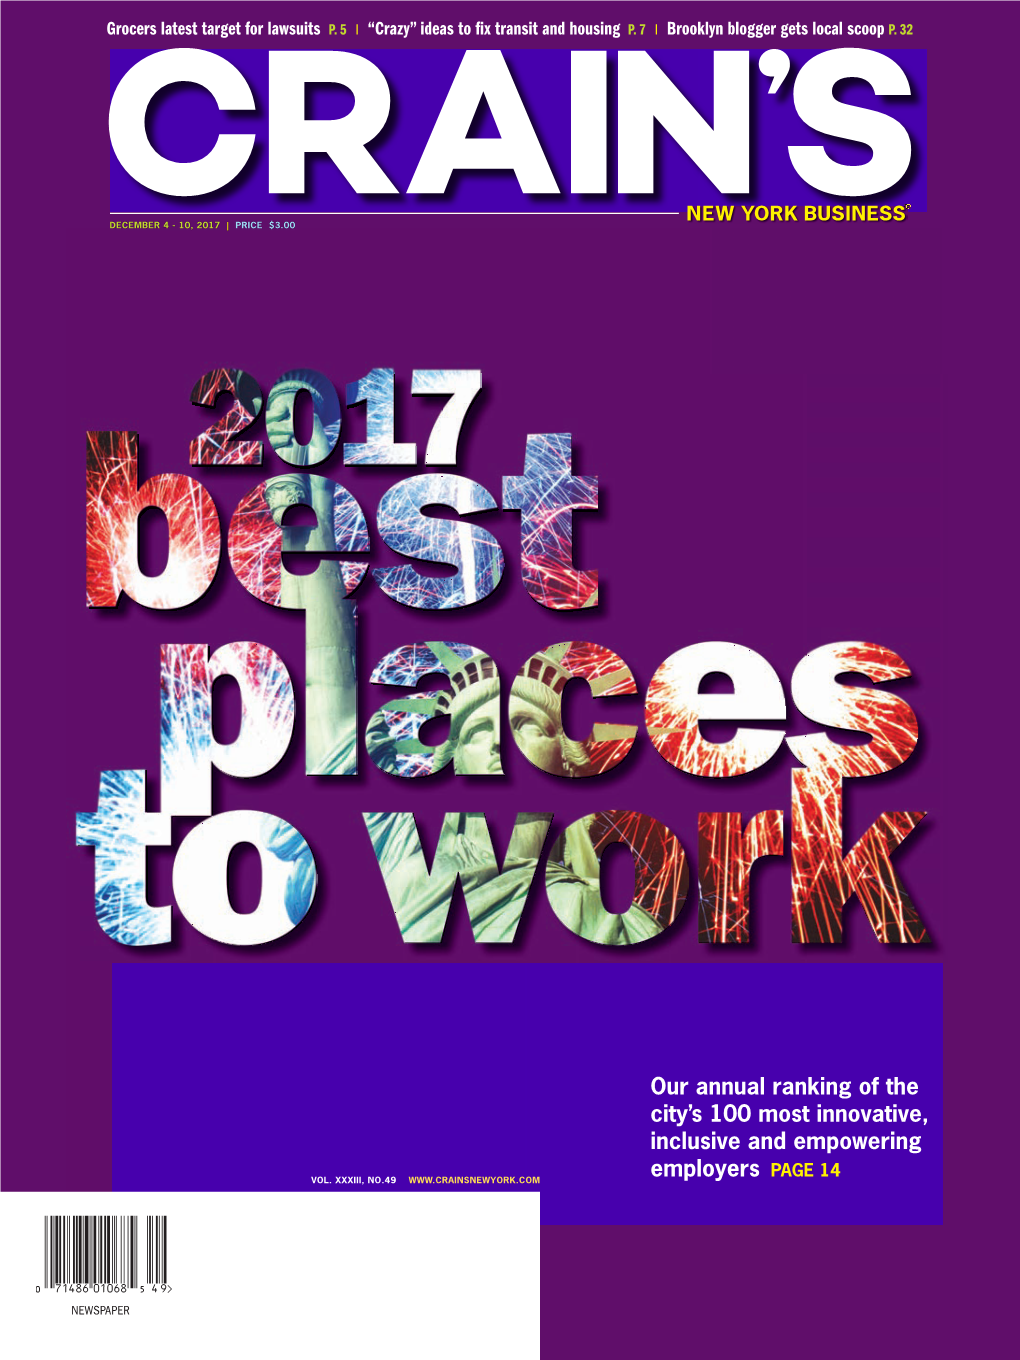 Our Annual Ranking of the City's 100 Most Innovative, Inclusive and Empowering Employers PAGE 14